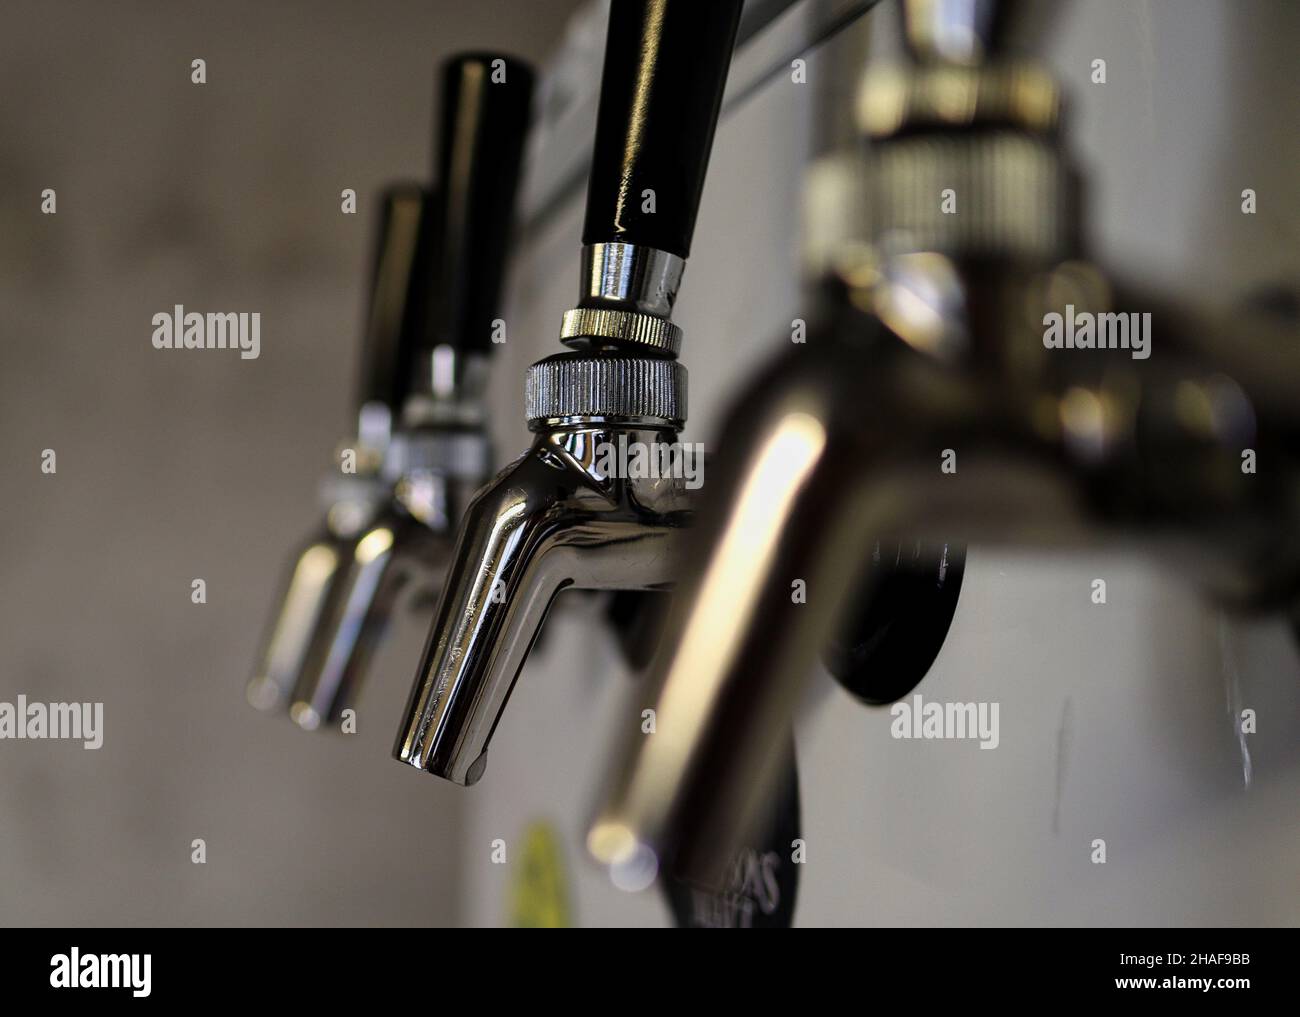 A row of four beer taps with one in focus Stock Photo